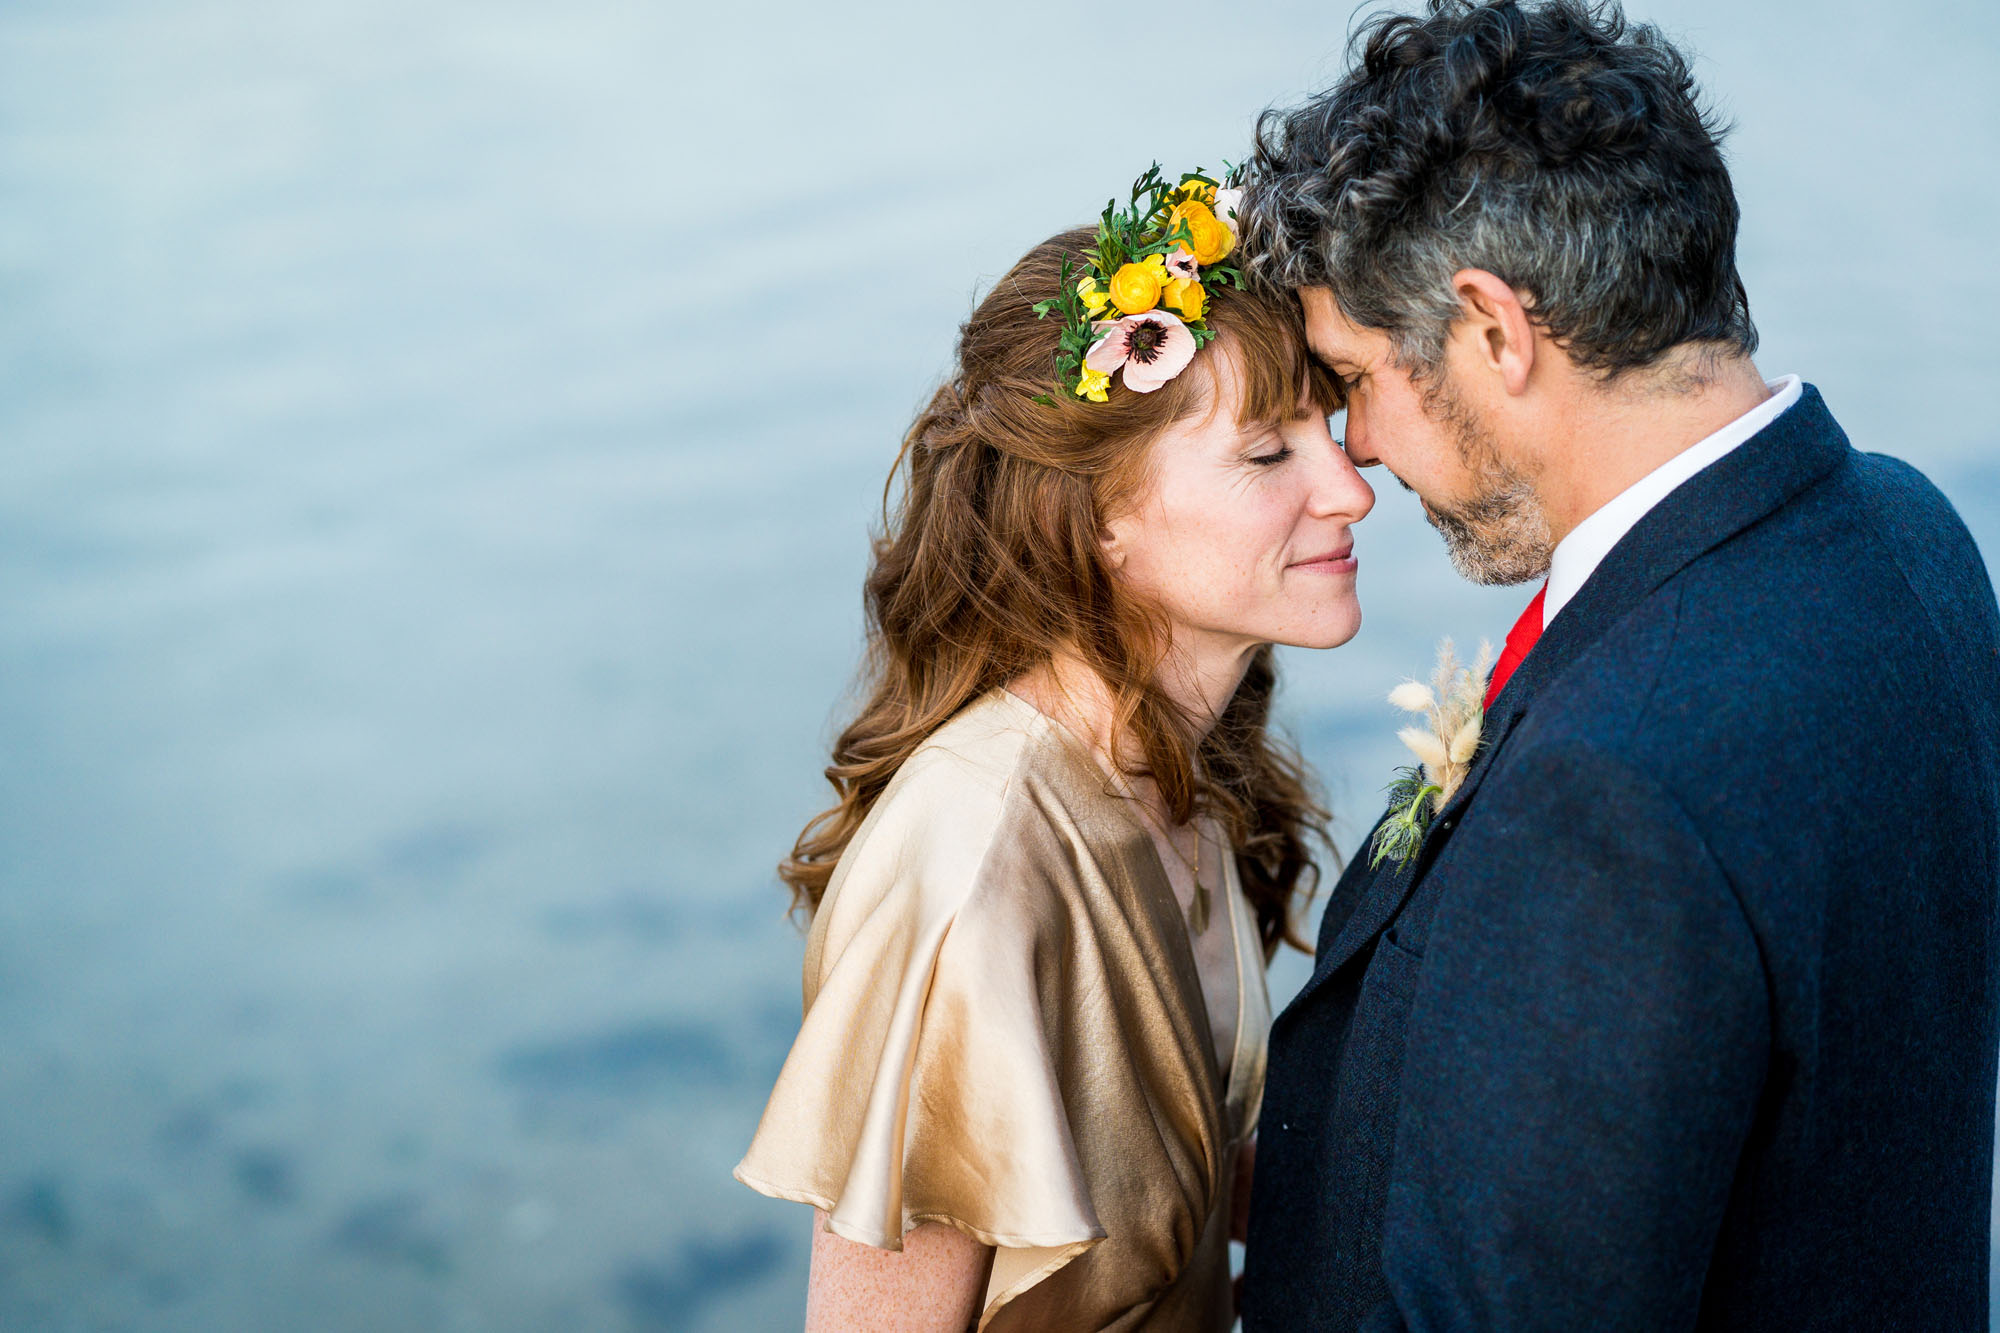 Lisa and Duncan planned an alternative wedding to suit them. Lisa's wearing a gold dress and a paper flower hair accessory, and Duncan's in a blue jacket with red tie. They're touching foreheads and smiling, with the sea behind them. By Benjamin Toms Photography in Kent